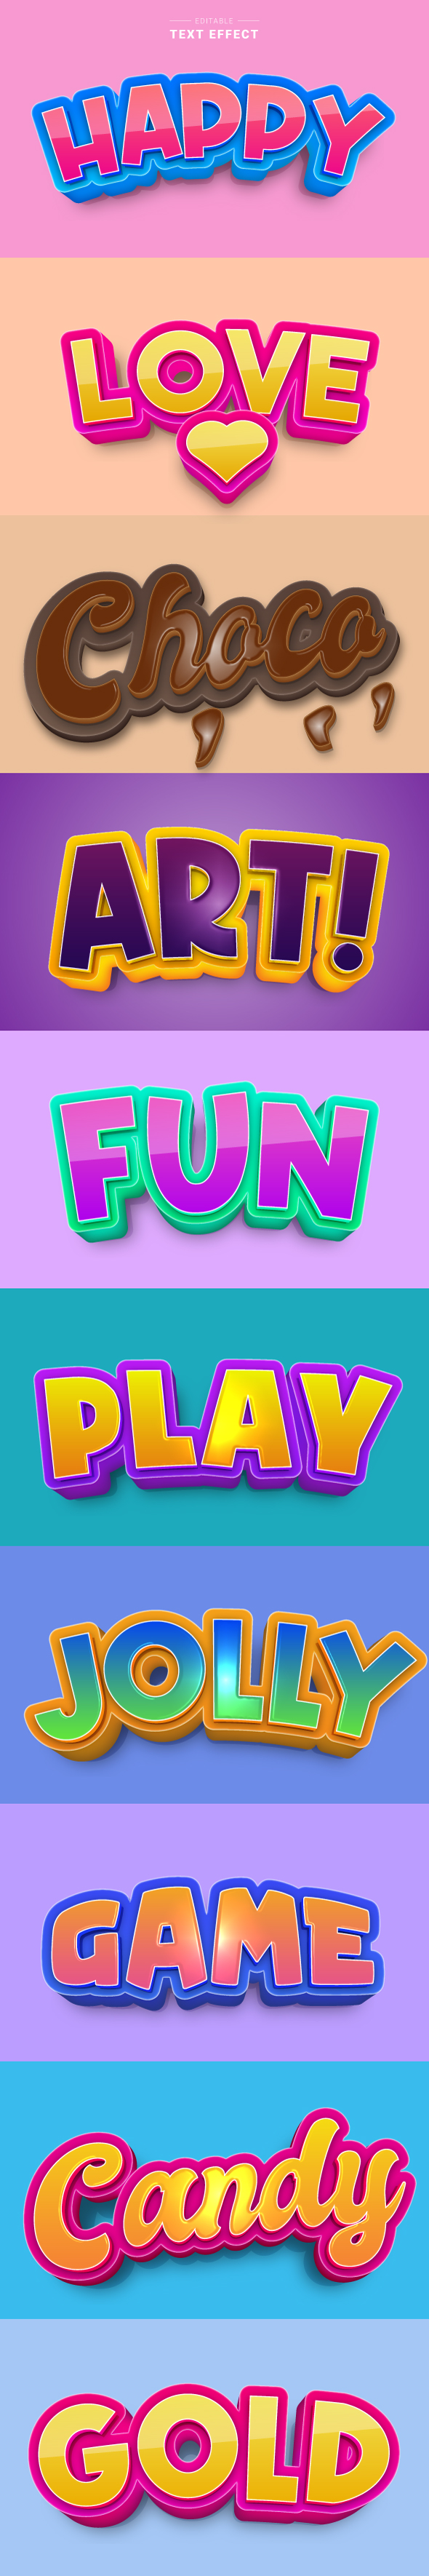 [DOWNLOAD]3D Cartoon Text Effect for Illustrator.